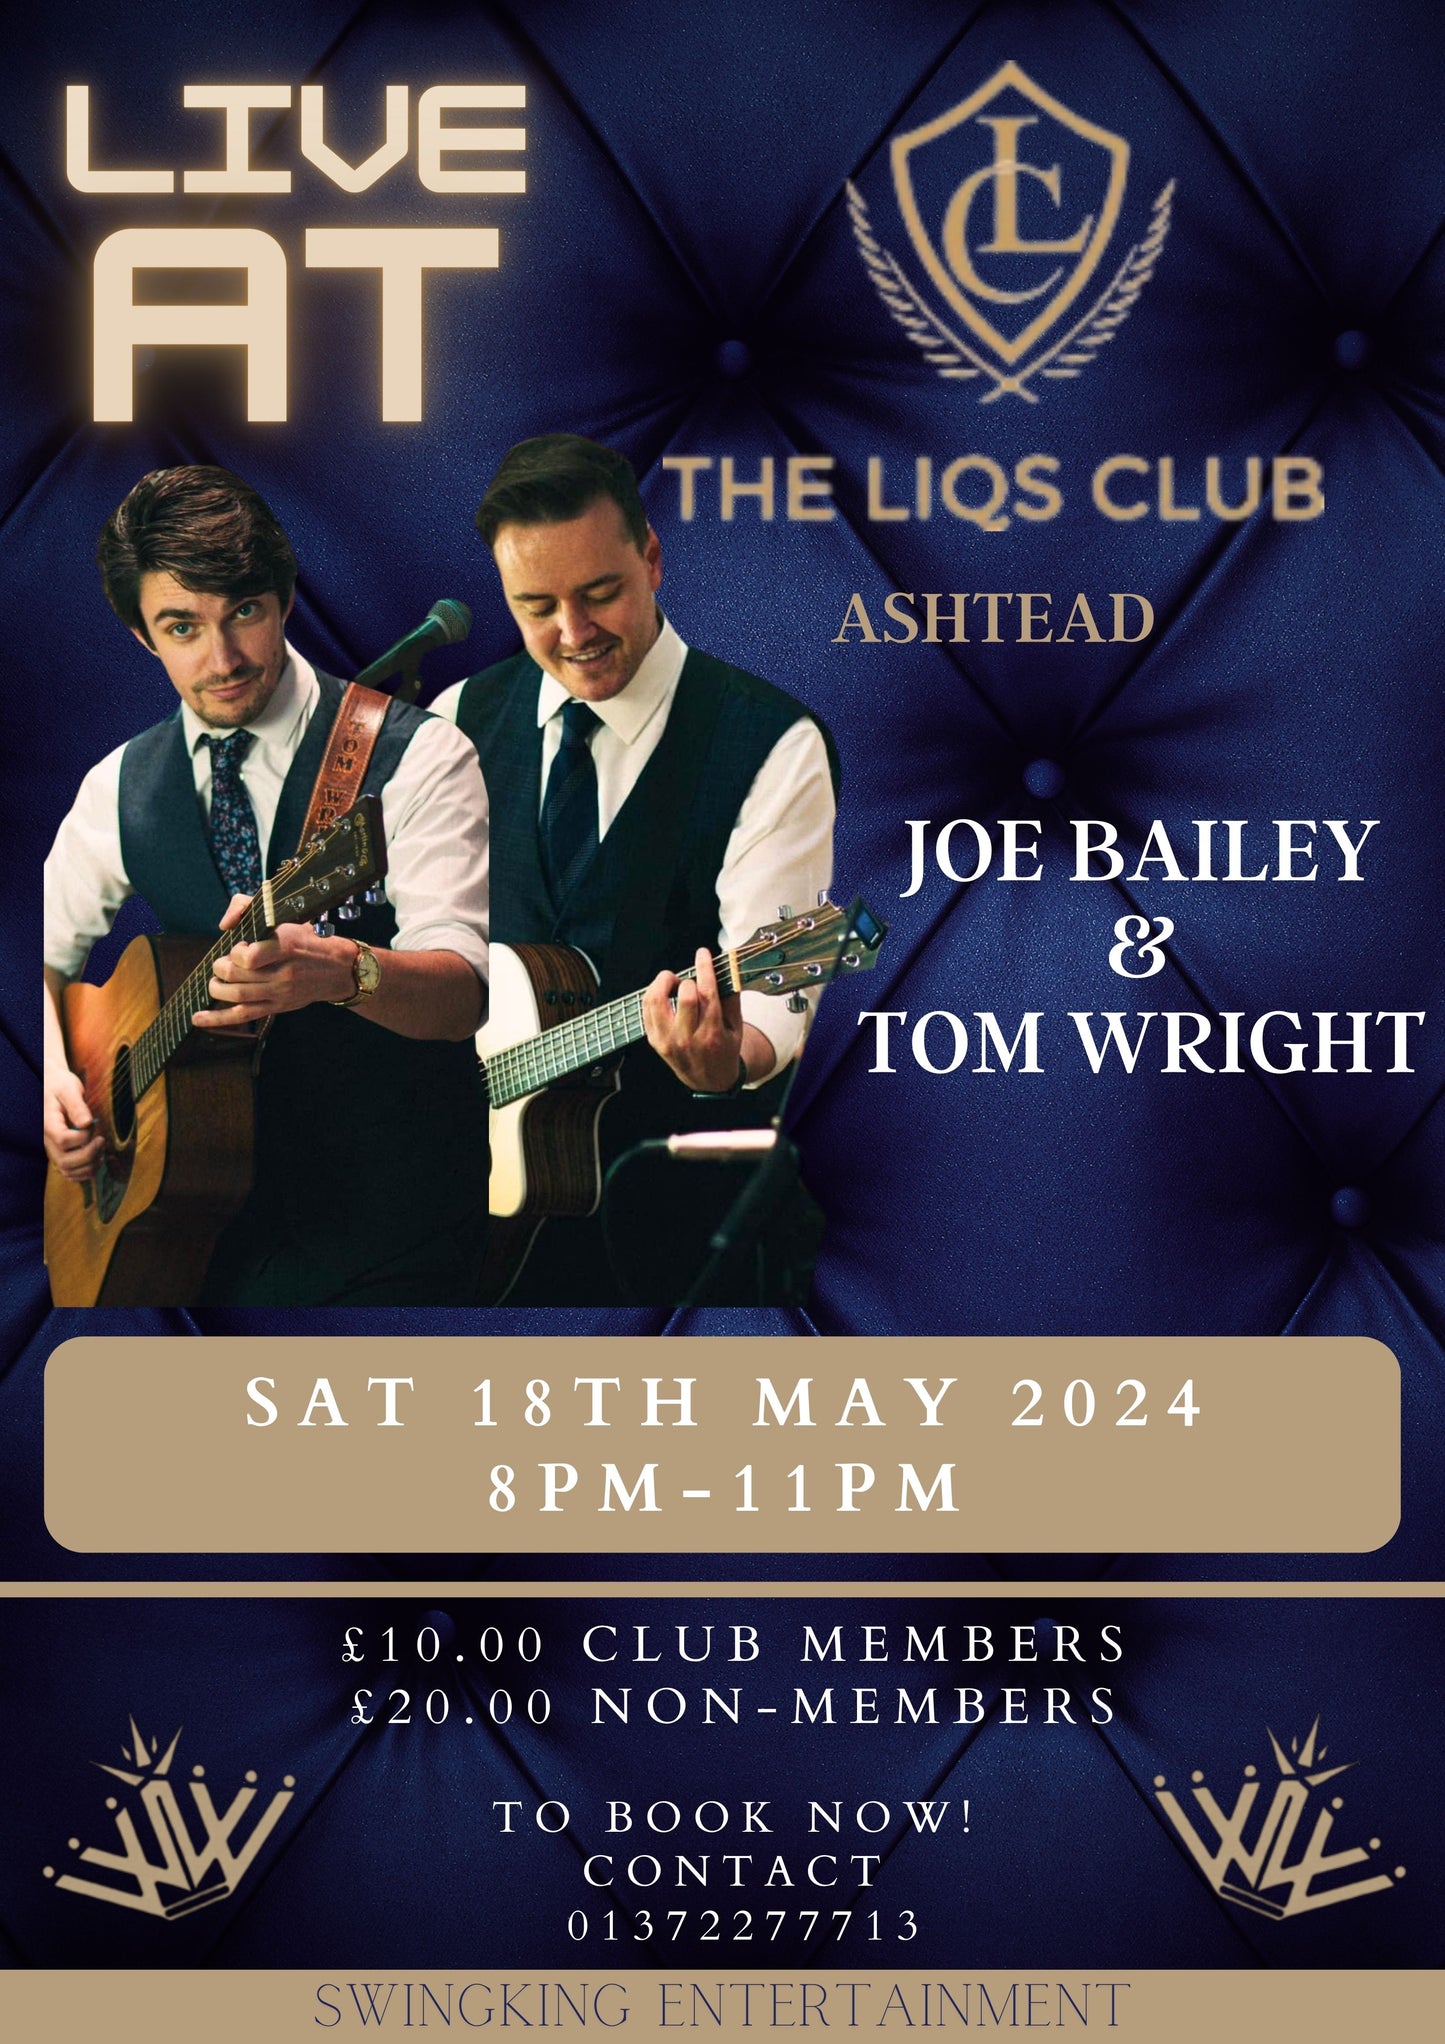 Live Music with Joe Bailey & Tom Wright - Saturday 18th May 2024